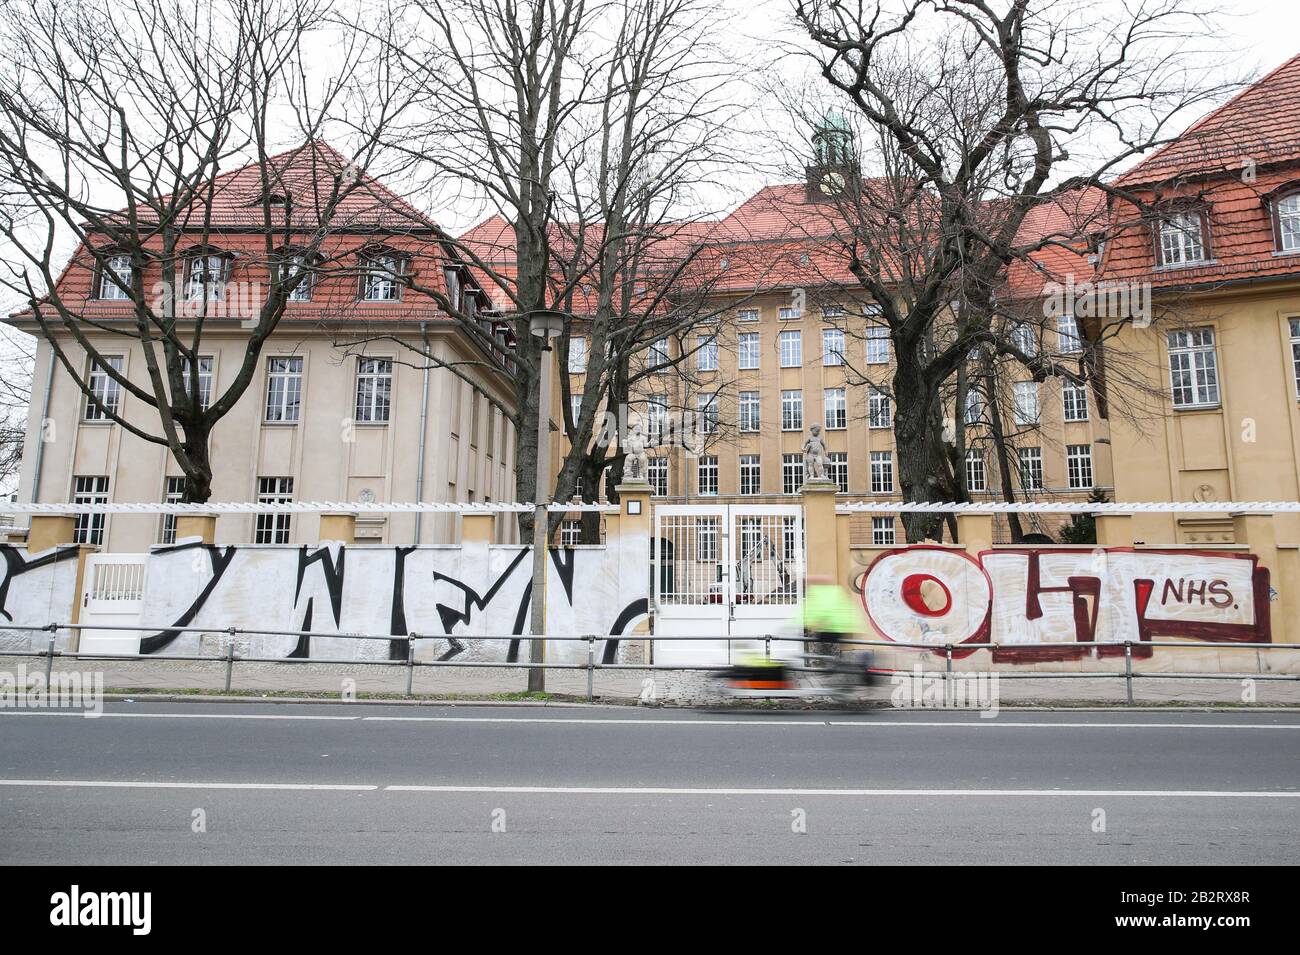 Berlin. 3rd Mar, 2020. Photo taken on March 3, 2020 shows a view of the Emanuel Lasker School, which was closed due to a COVID-19 case, in Berlin, capital of Germany. Germany's confirmed cases of COVID-19 have increased to 188 on Tuesday from 150 a day earlier, according to Robert Koch Institute (RKI), a federal government agency and research institute responsible for disease control and prevention. Credit: Shan Yuqi/Xinhua/Alamy Live News Stock Photo